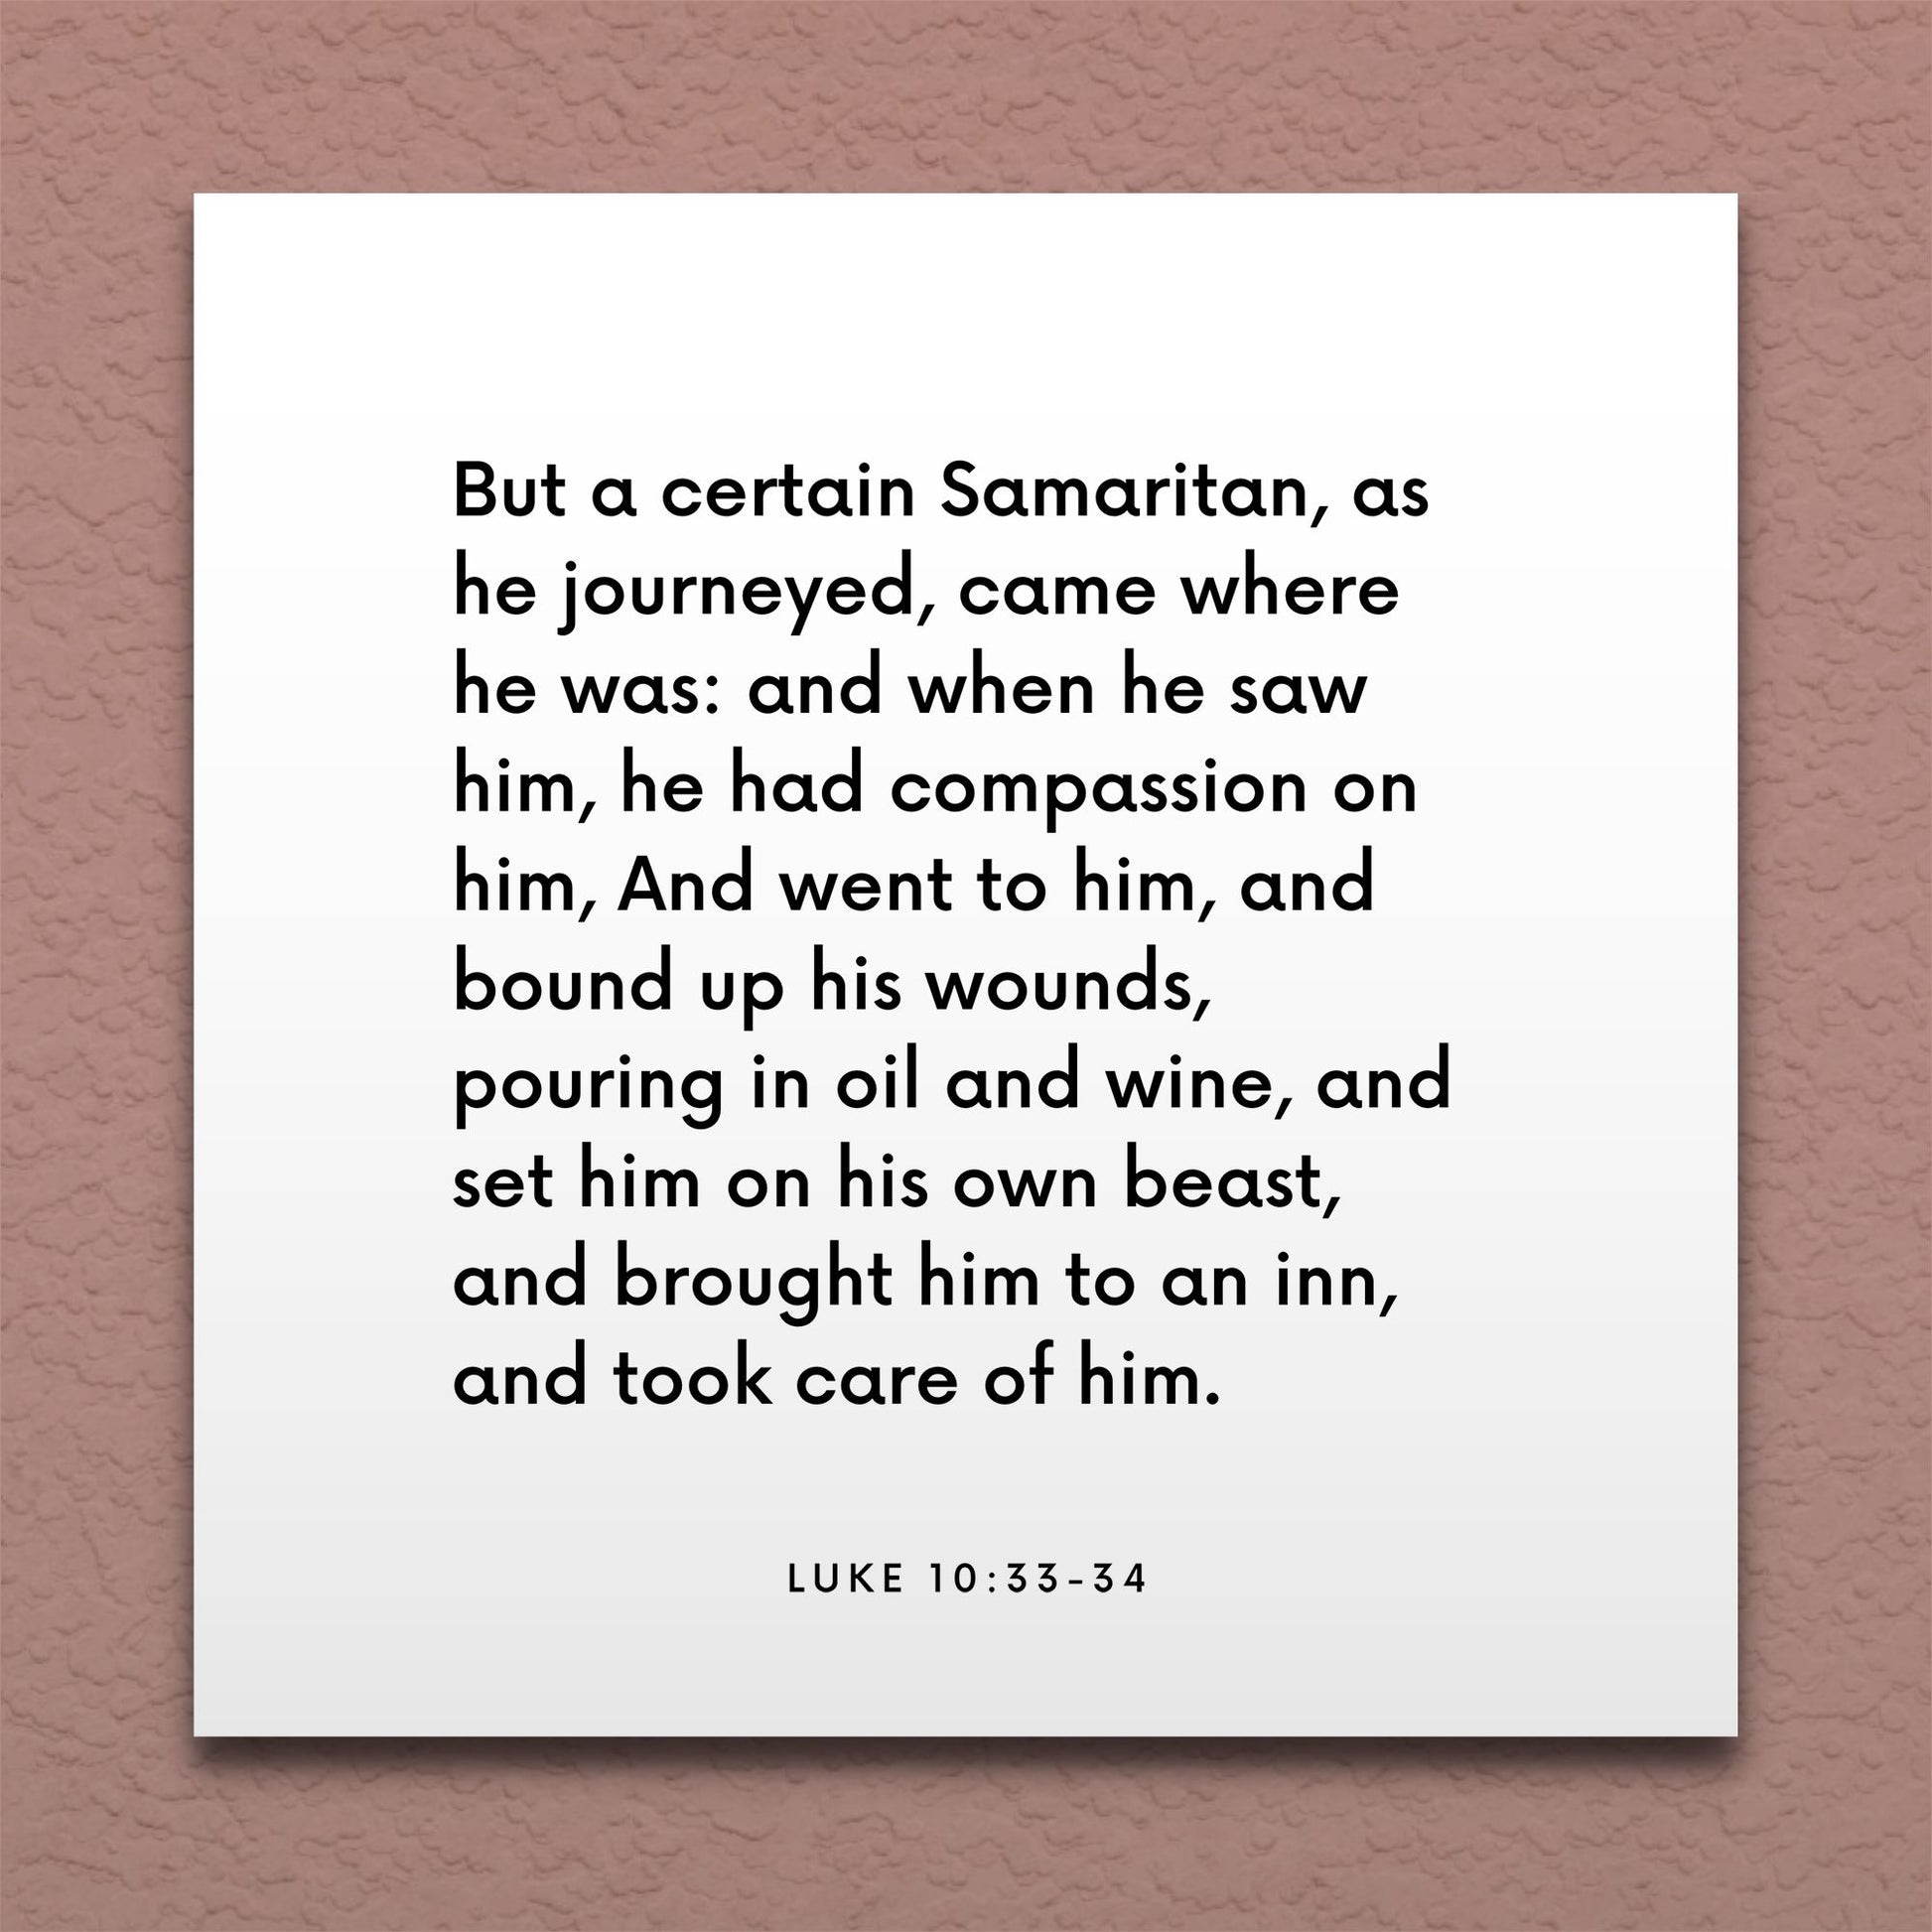 Wall-mounted scripture tile for Luke 10:33-34 - "But a certain Samaritan had compassion on him"